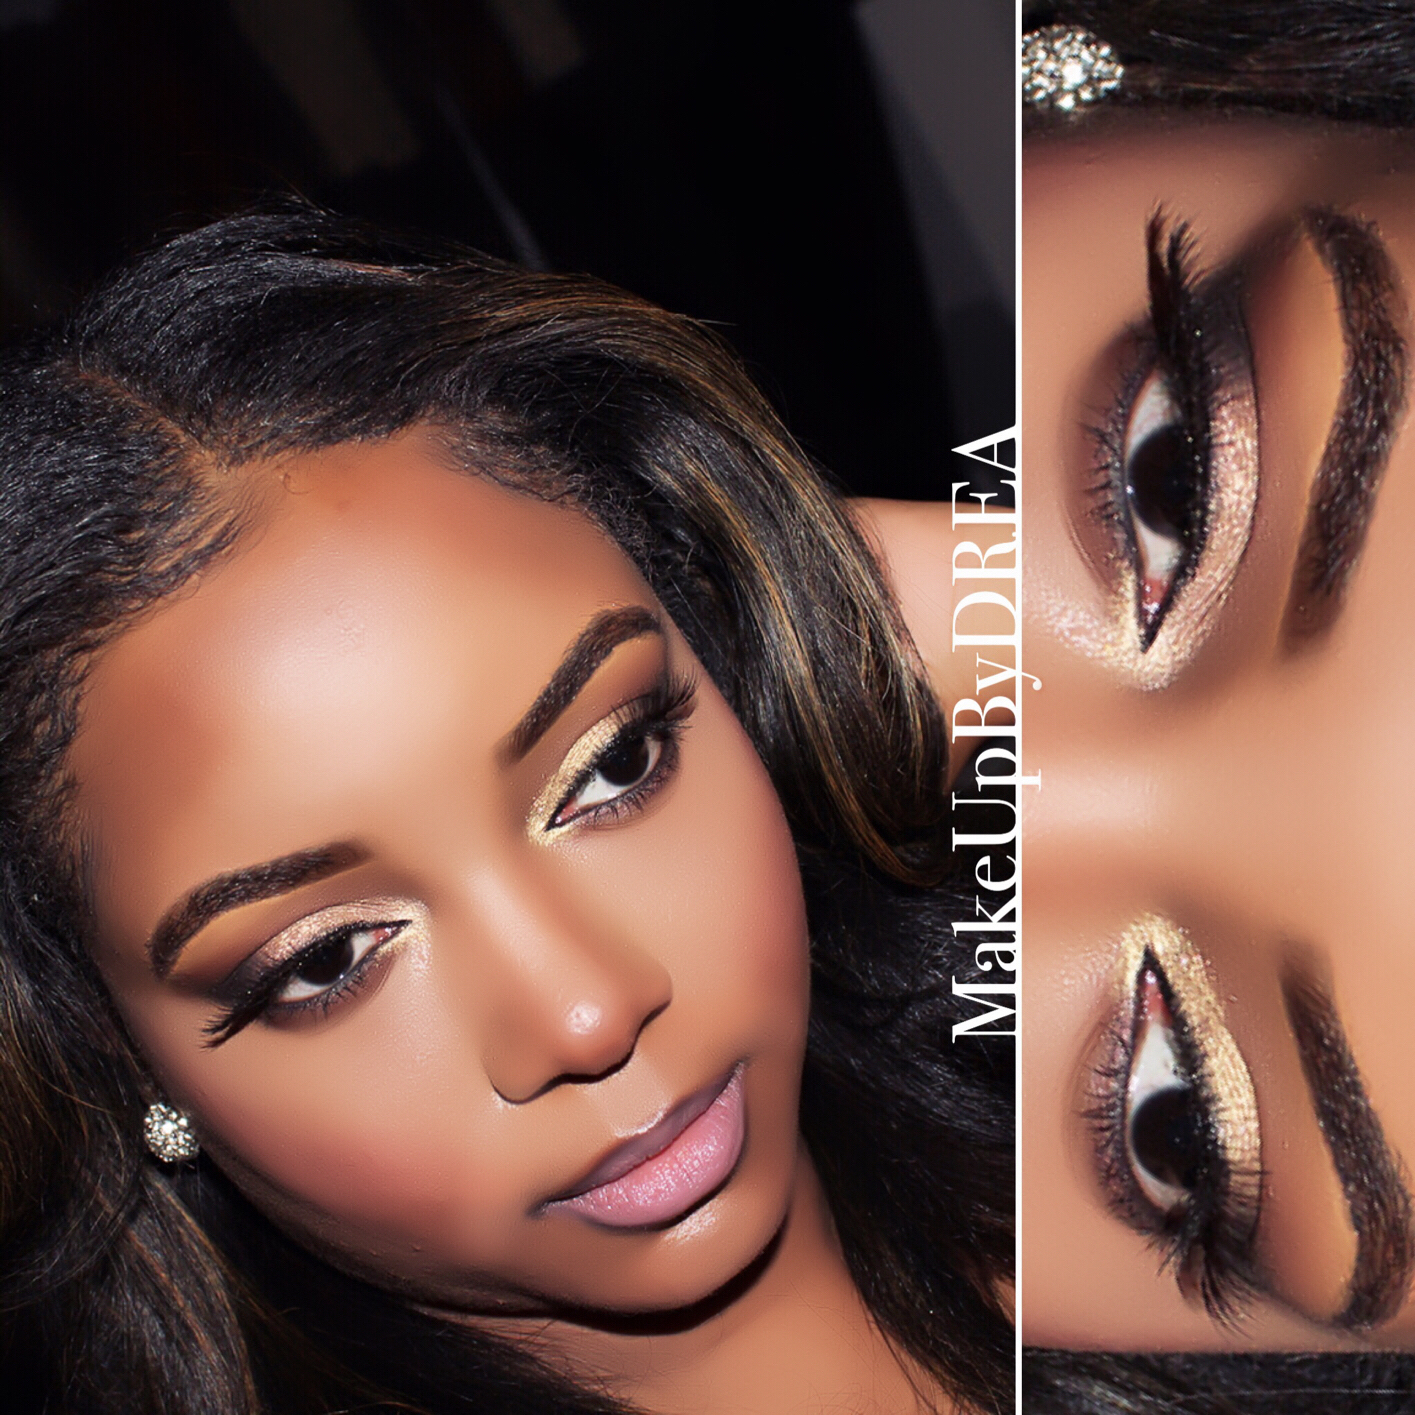 Beauty is in the eye of the beholder [ MakeUpByDREA ]